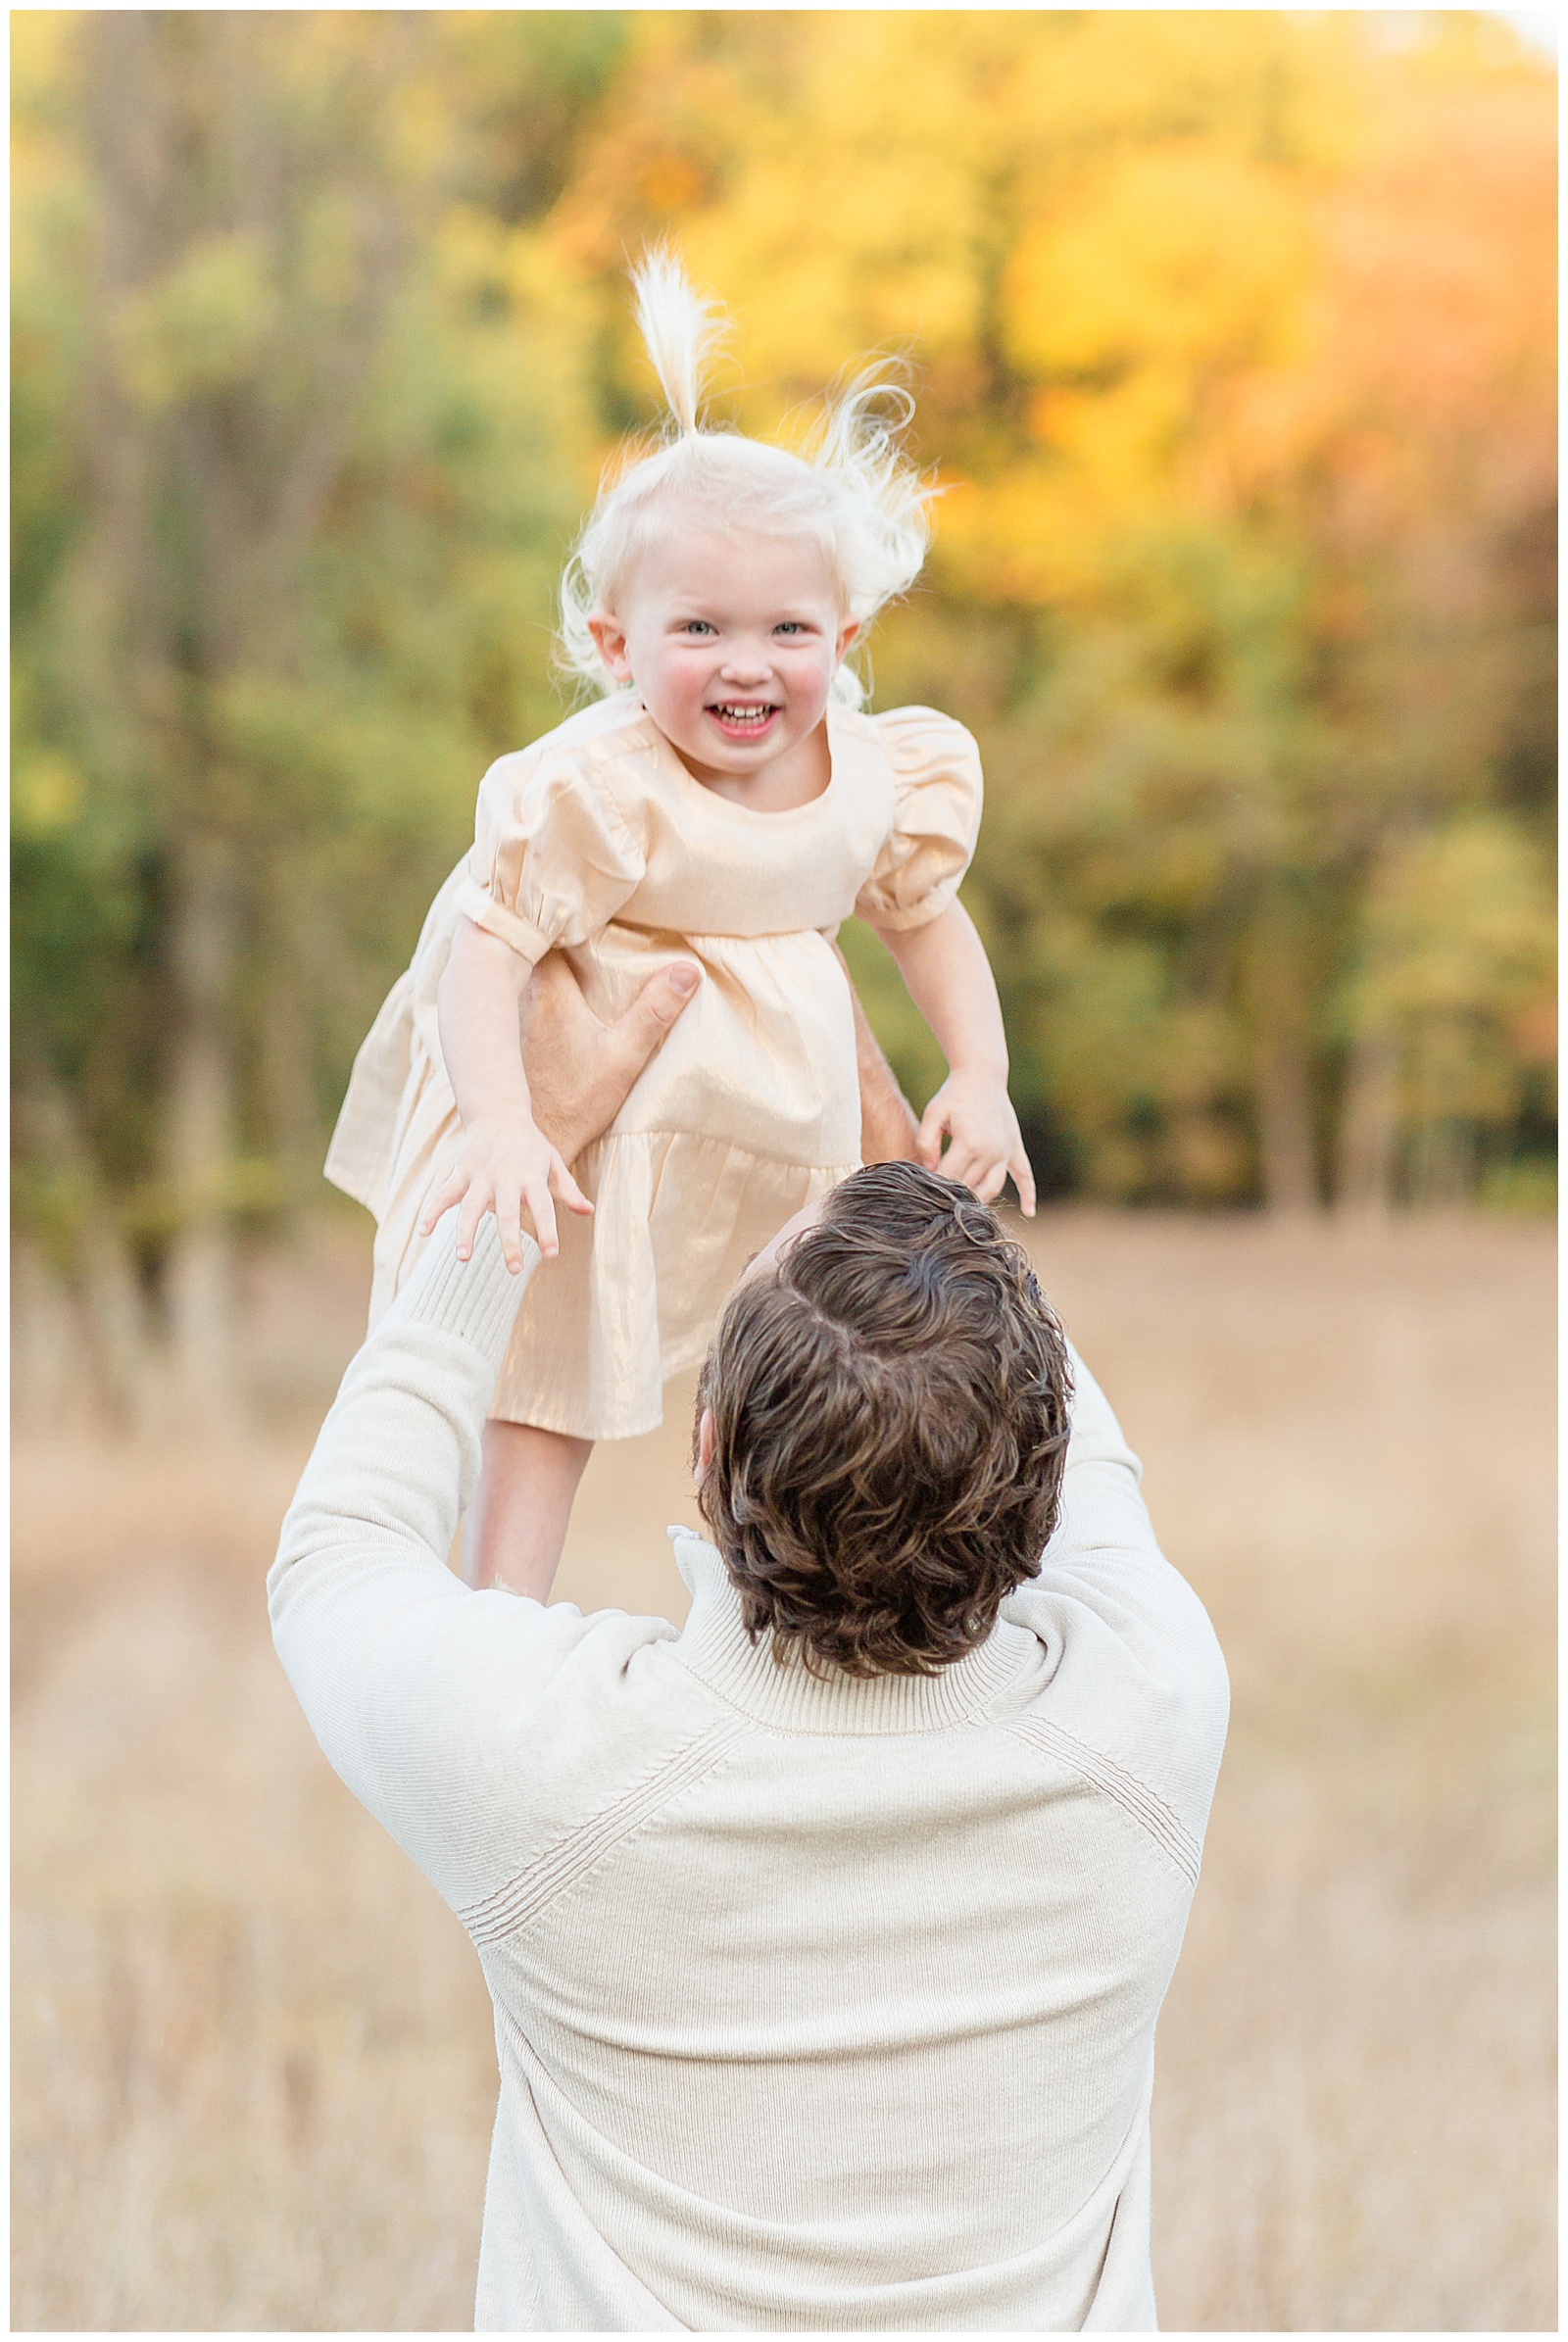 Dad, wearing a white sweater has his back turned to the camera as he lifts his toddler daughter up in the air as she smiles at the camera with her gold, shimmery dress.